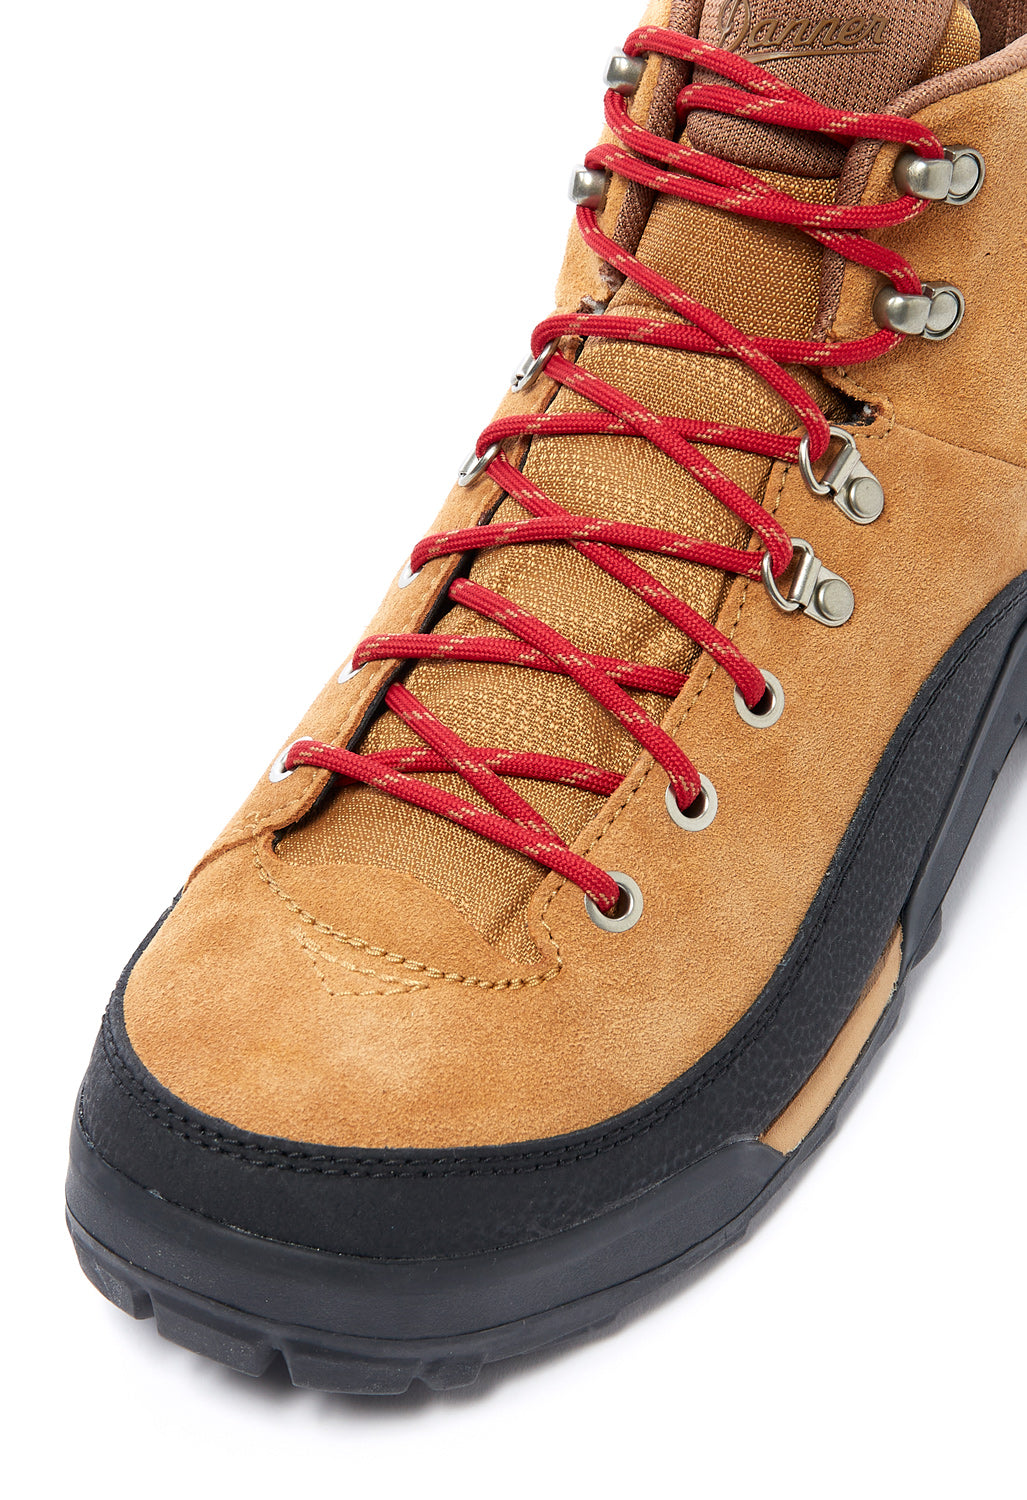 Danner Men's Panorama Mid Boots - Brown/Red